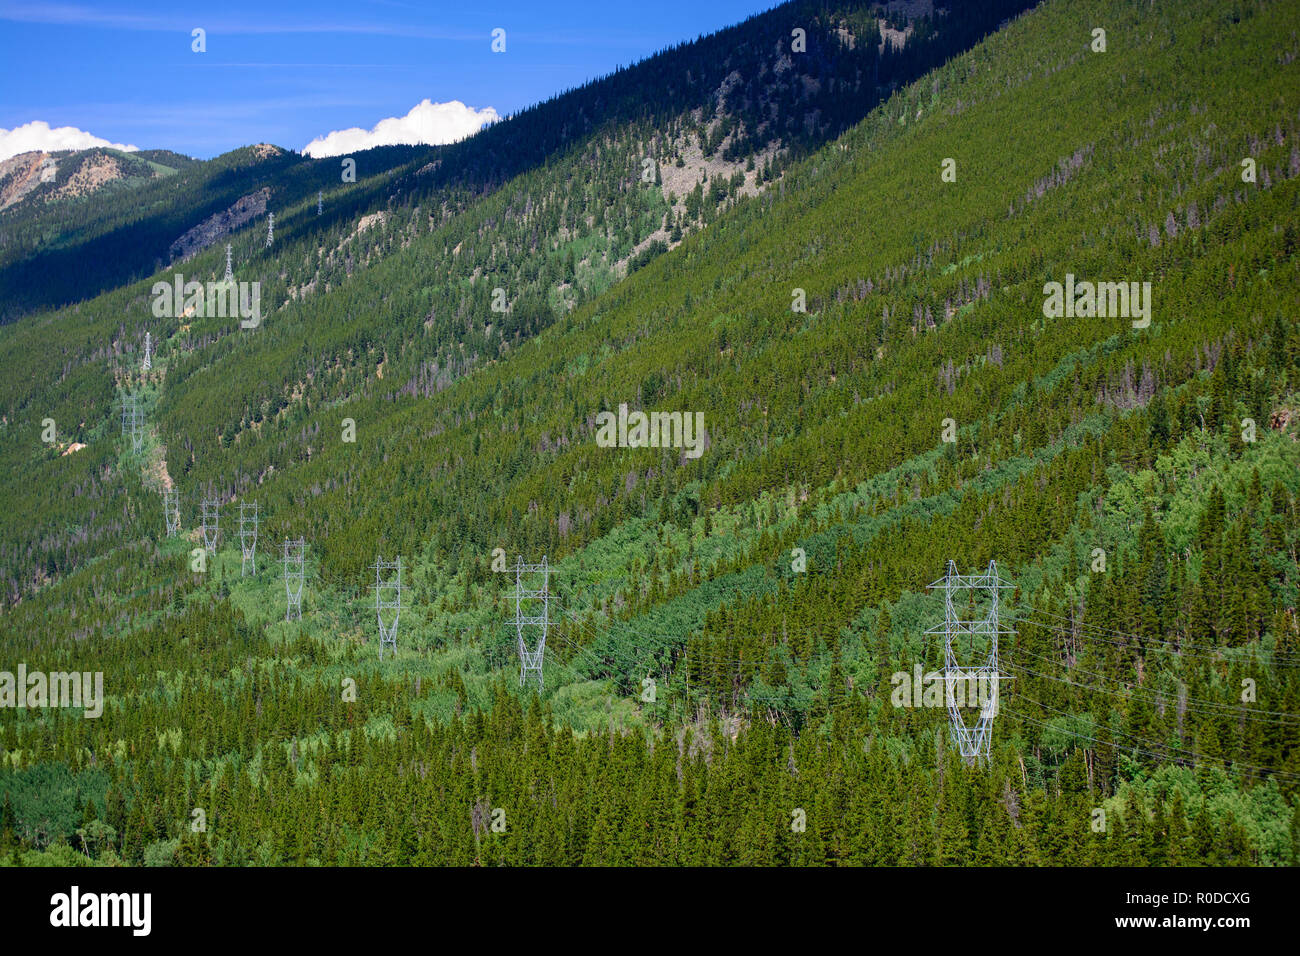 High Tension High Voltage Power Lines in the Mountains Stock Photo